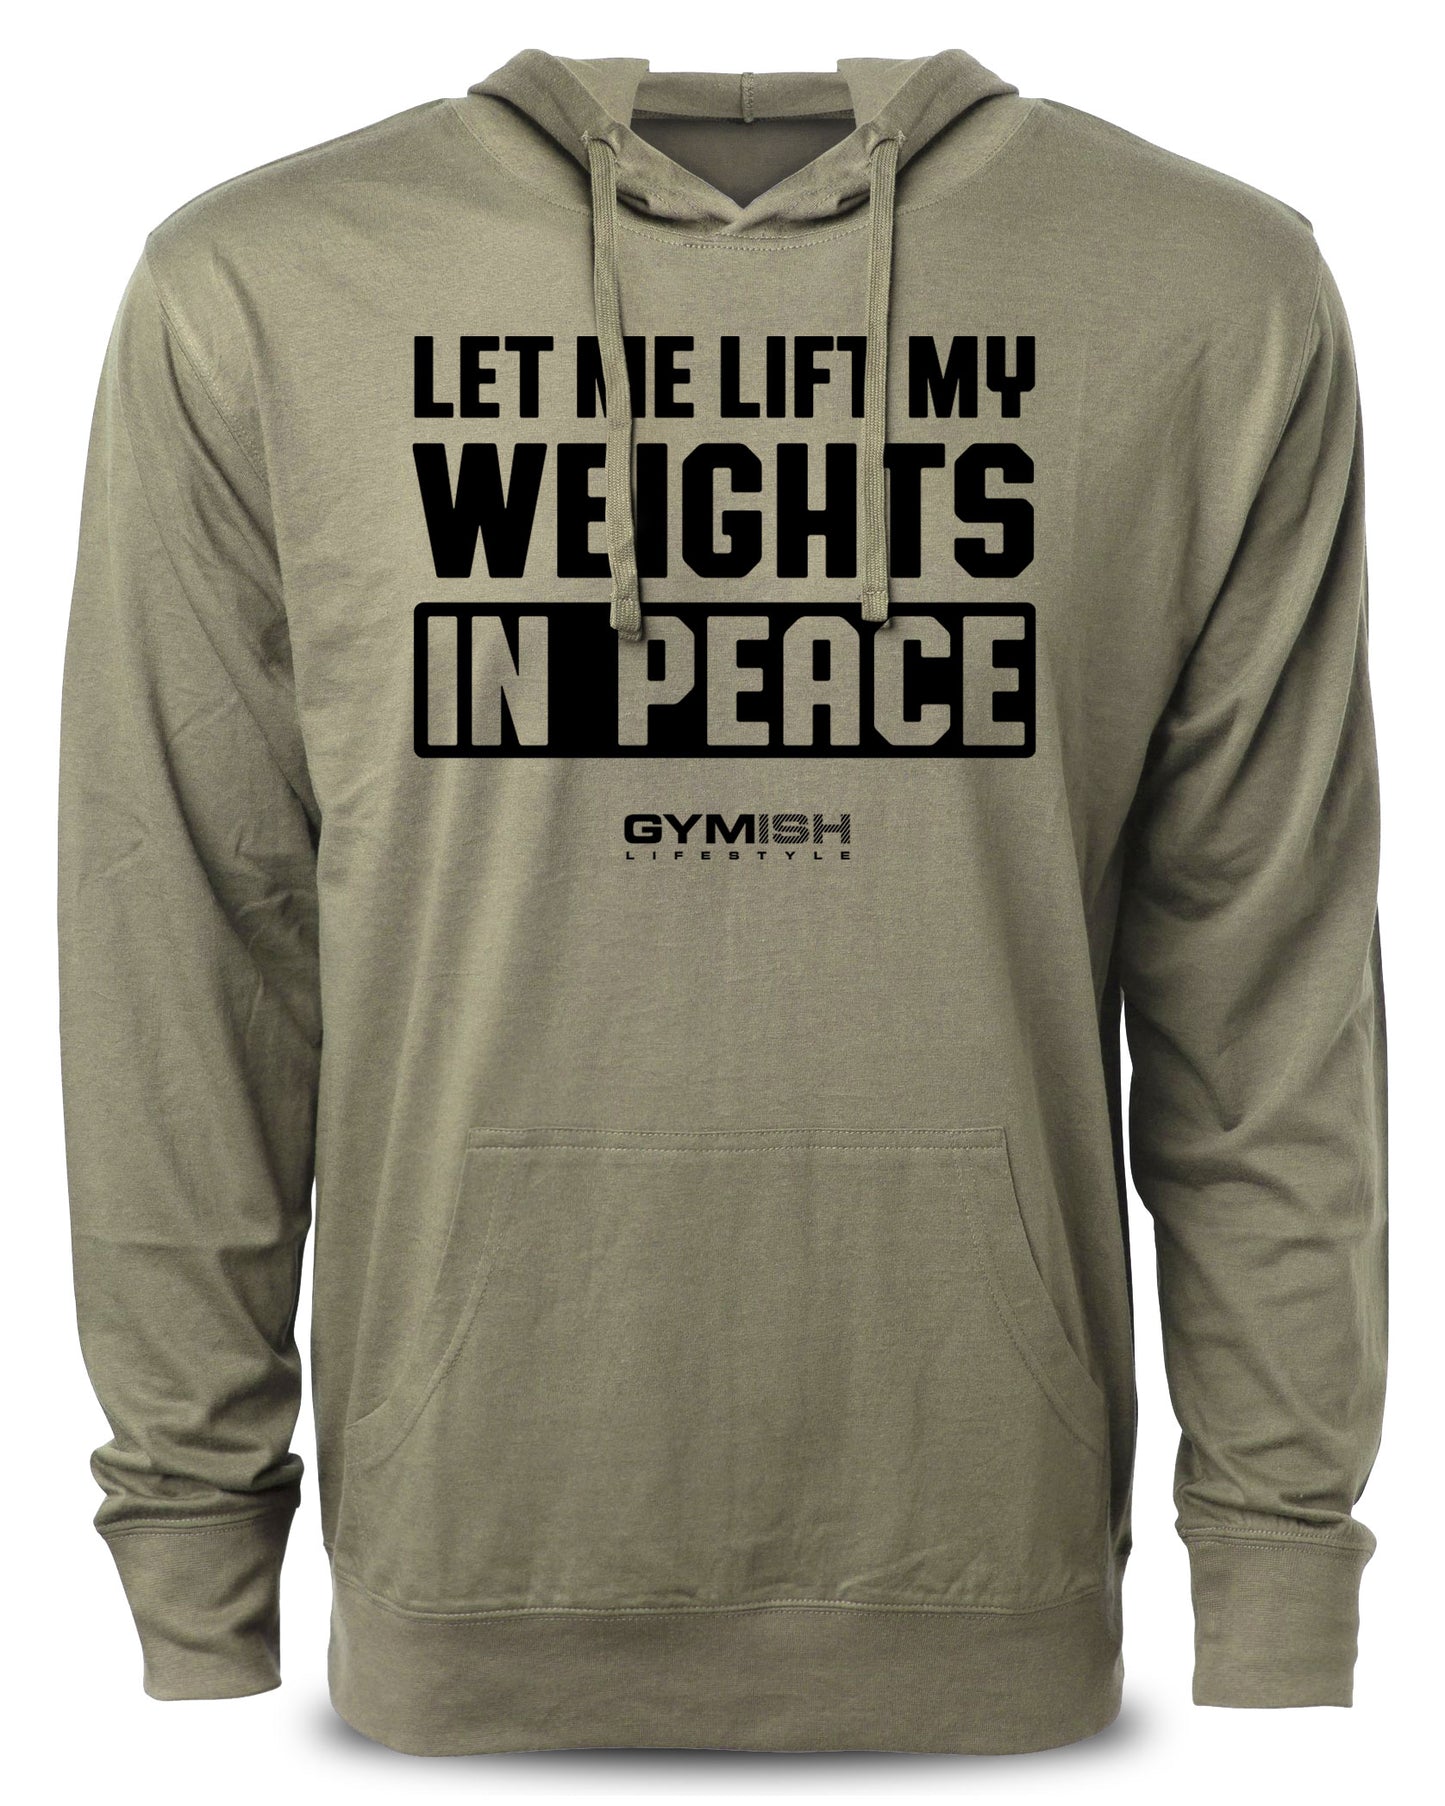 Let Me Lift My Weights In Peace Workout Hoodies Funny Hoodies Gym Sweatshirt Lifting Pullover